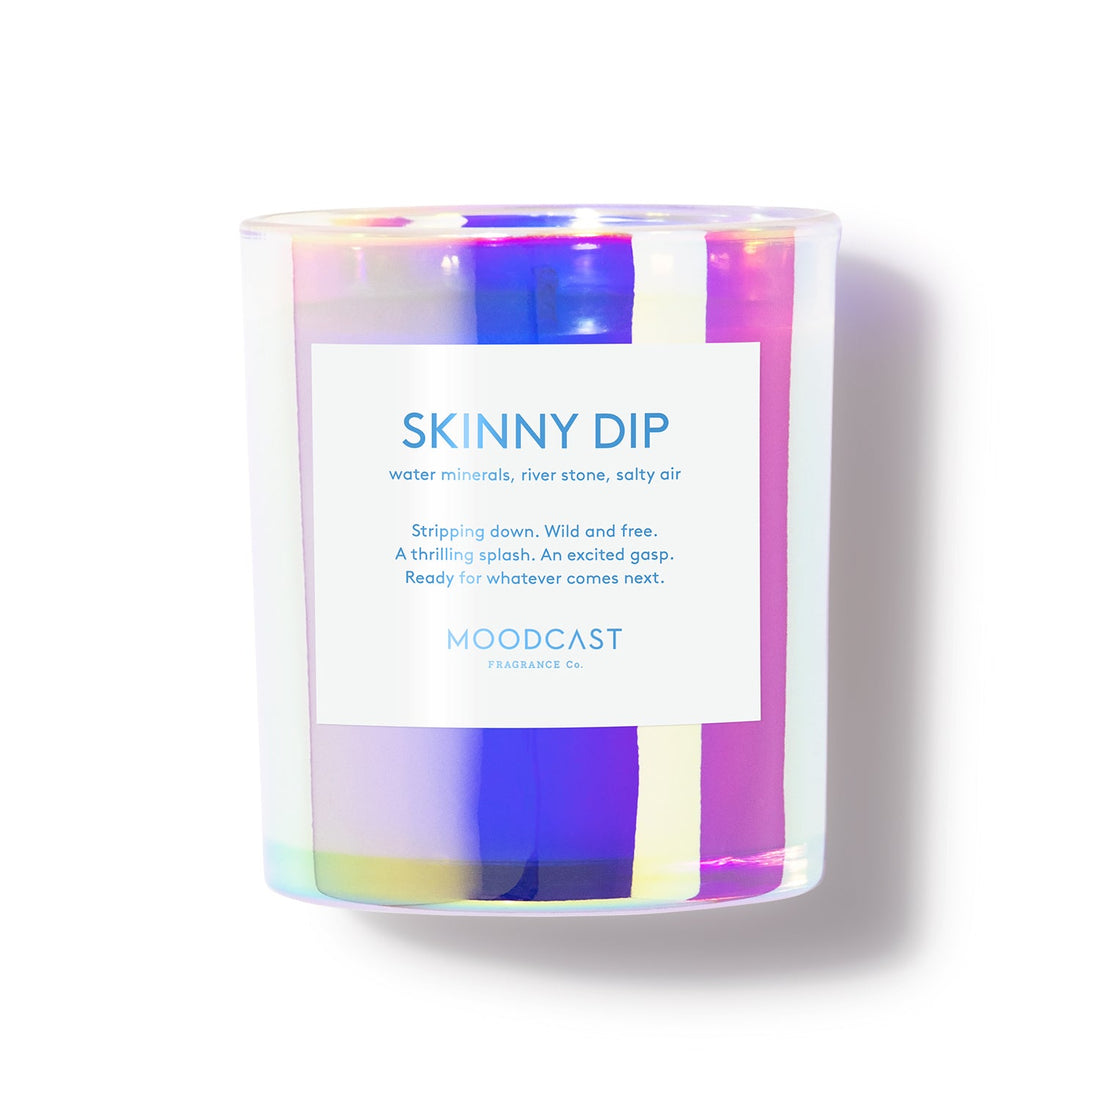 Skinny Dip - Vibes Collection (Iridescent) - 8oz/227g Coconut Wax Blend Glass Jar Candle - Key Notes: Water Minerals, River Stone, Salty Air